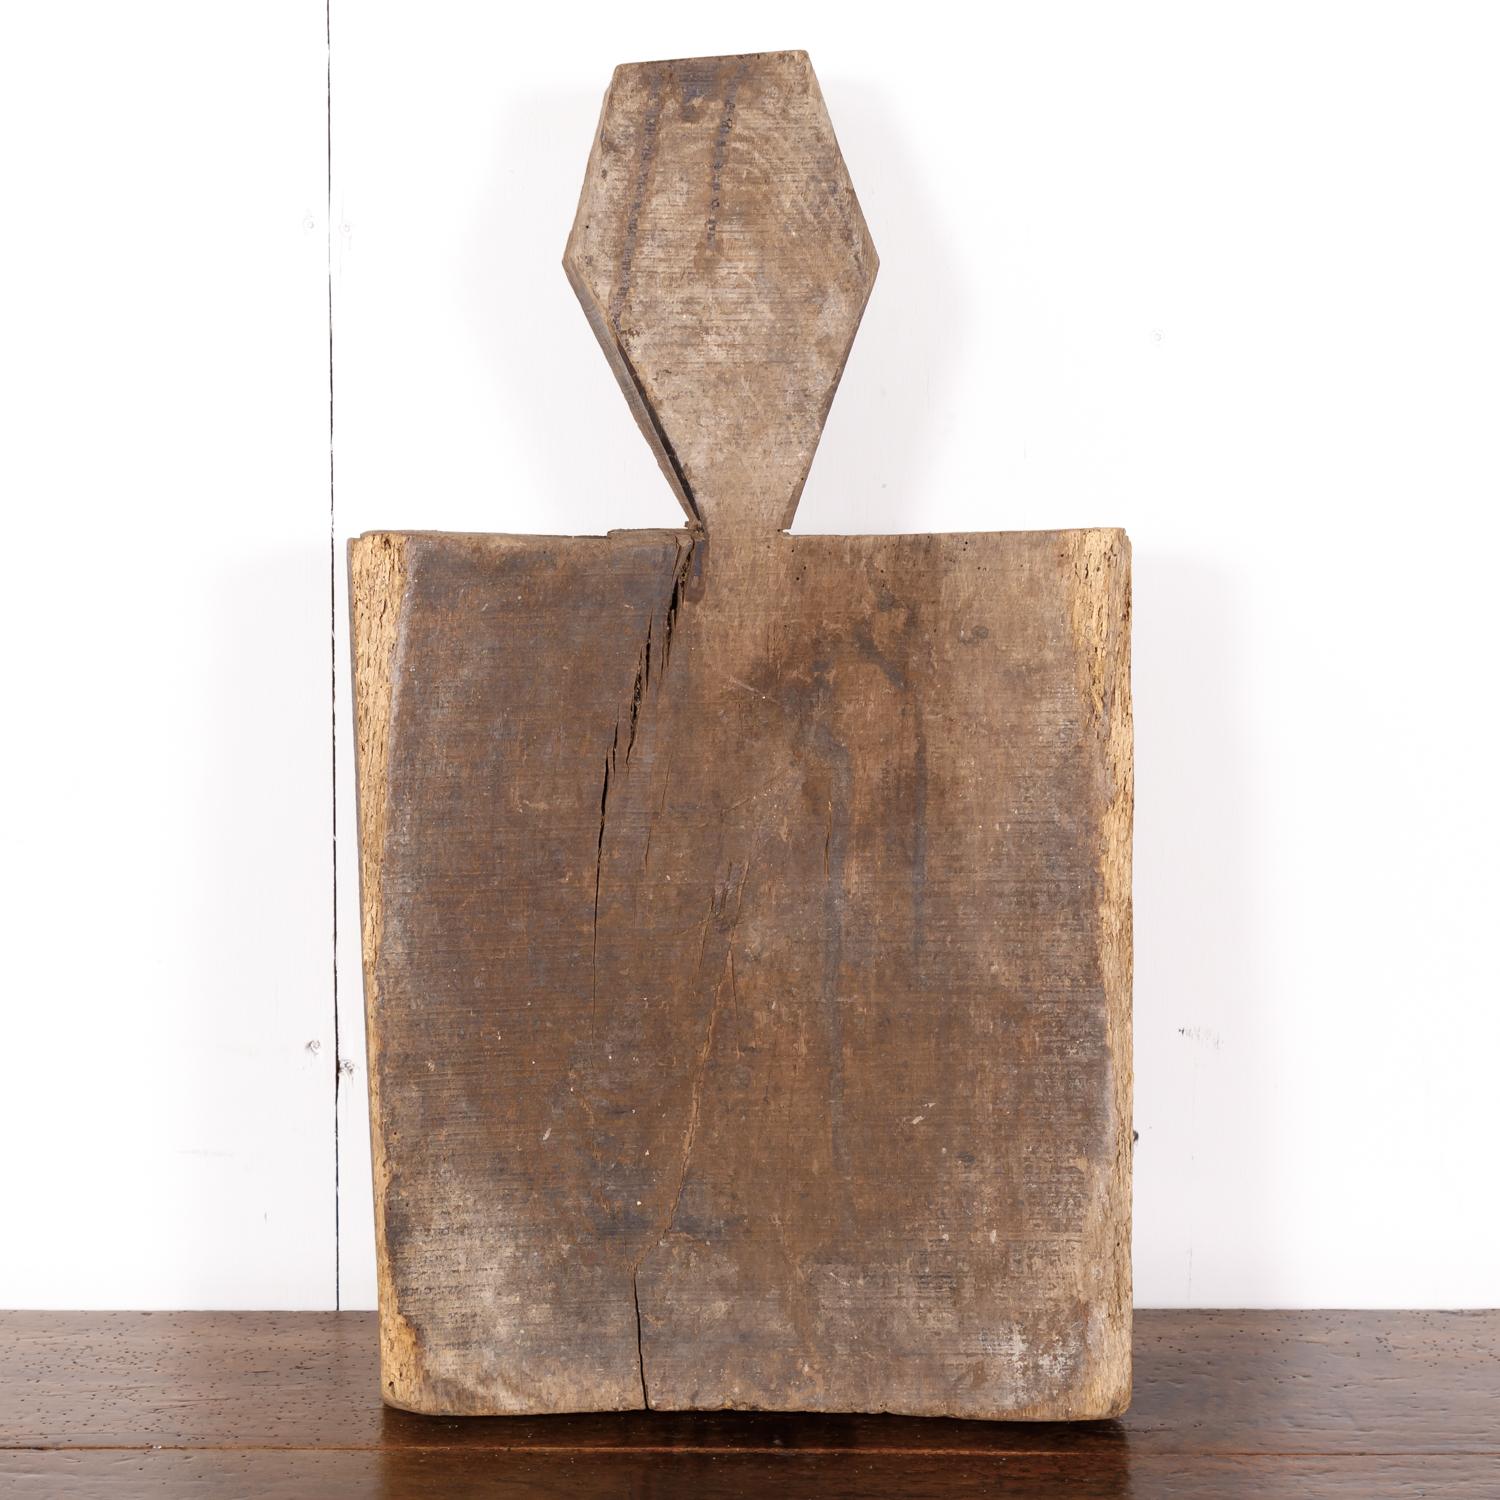 Late 18th Century 18th Century Rustic Country French Cutting Board or Chopping Block with Well